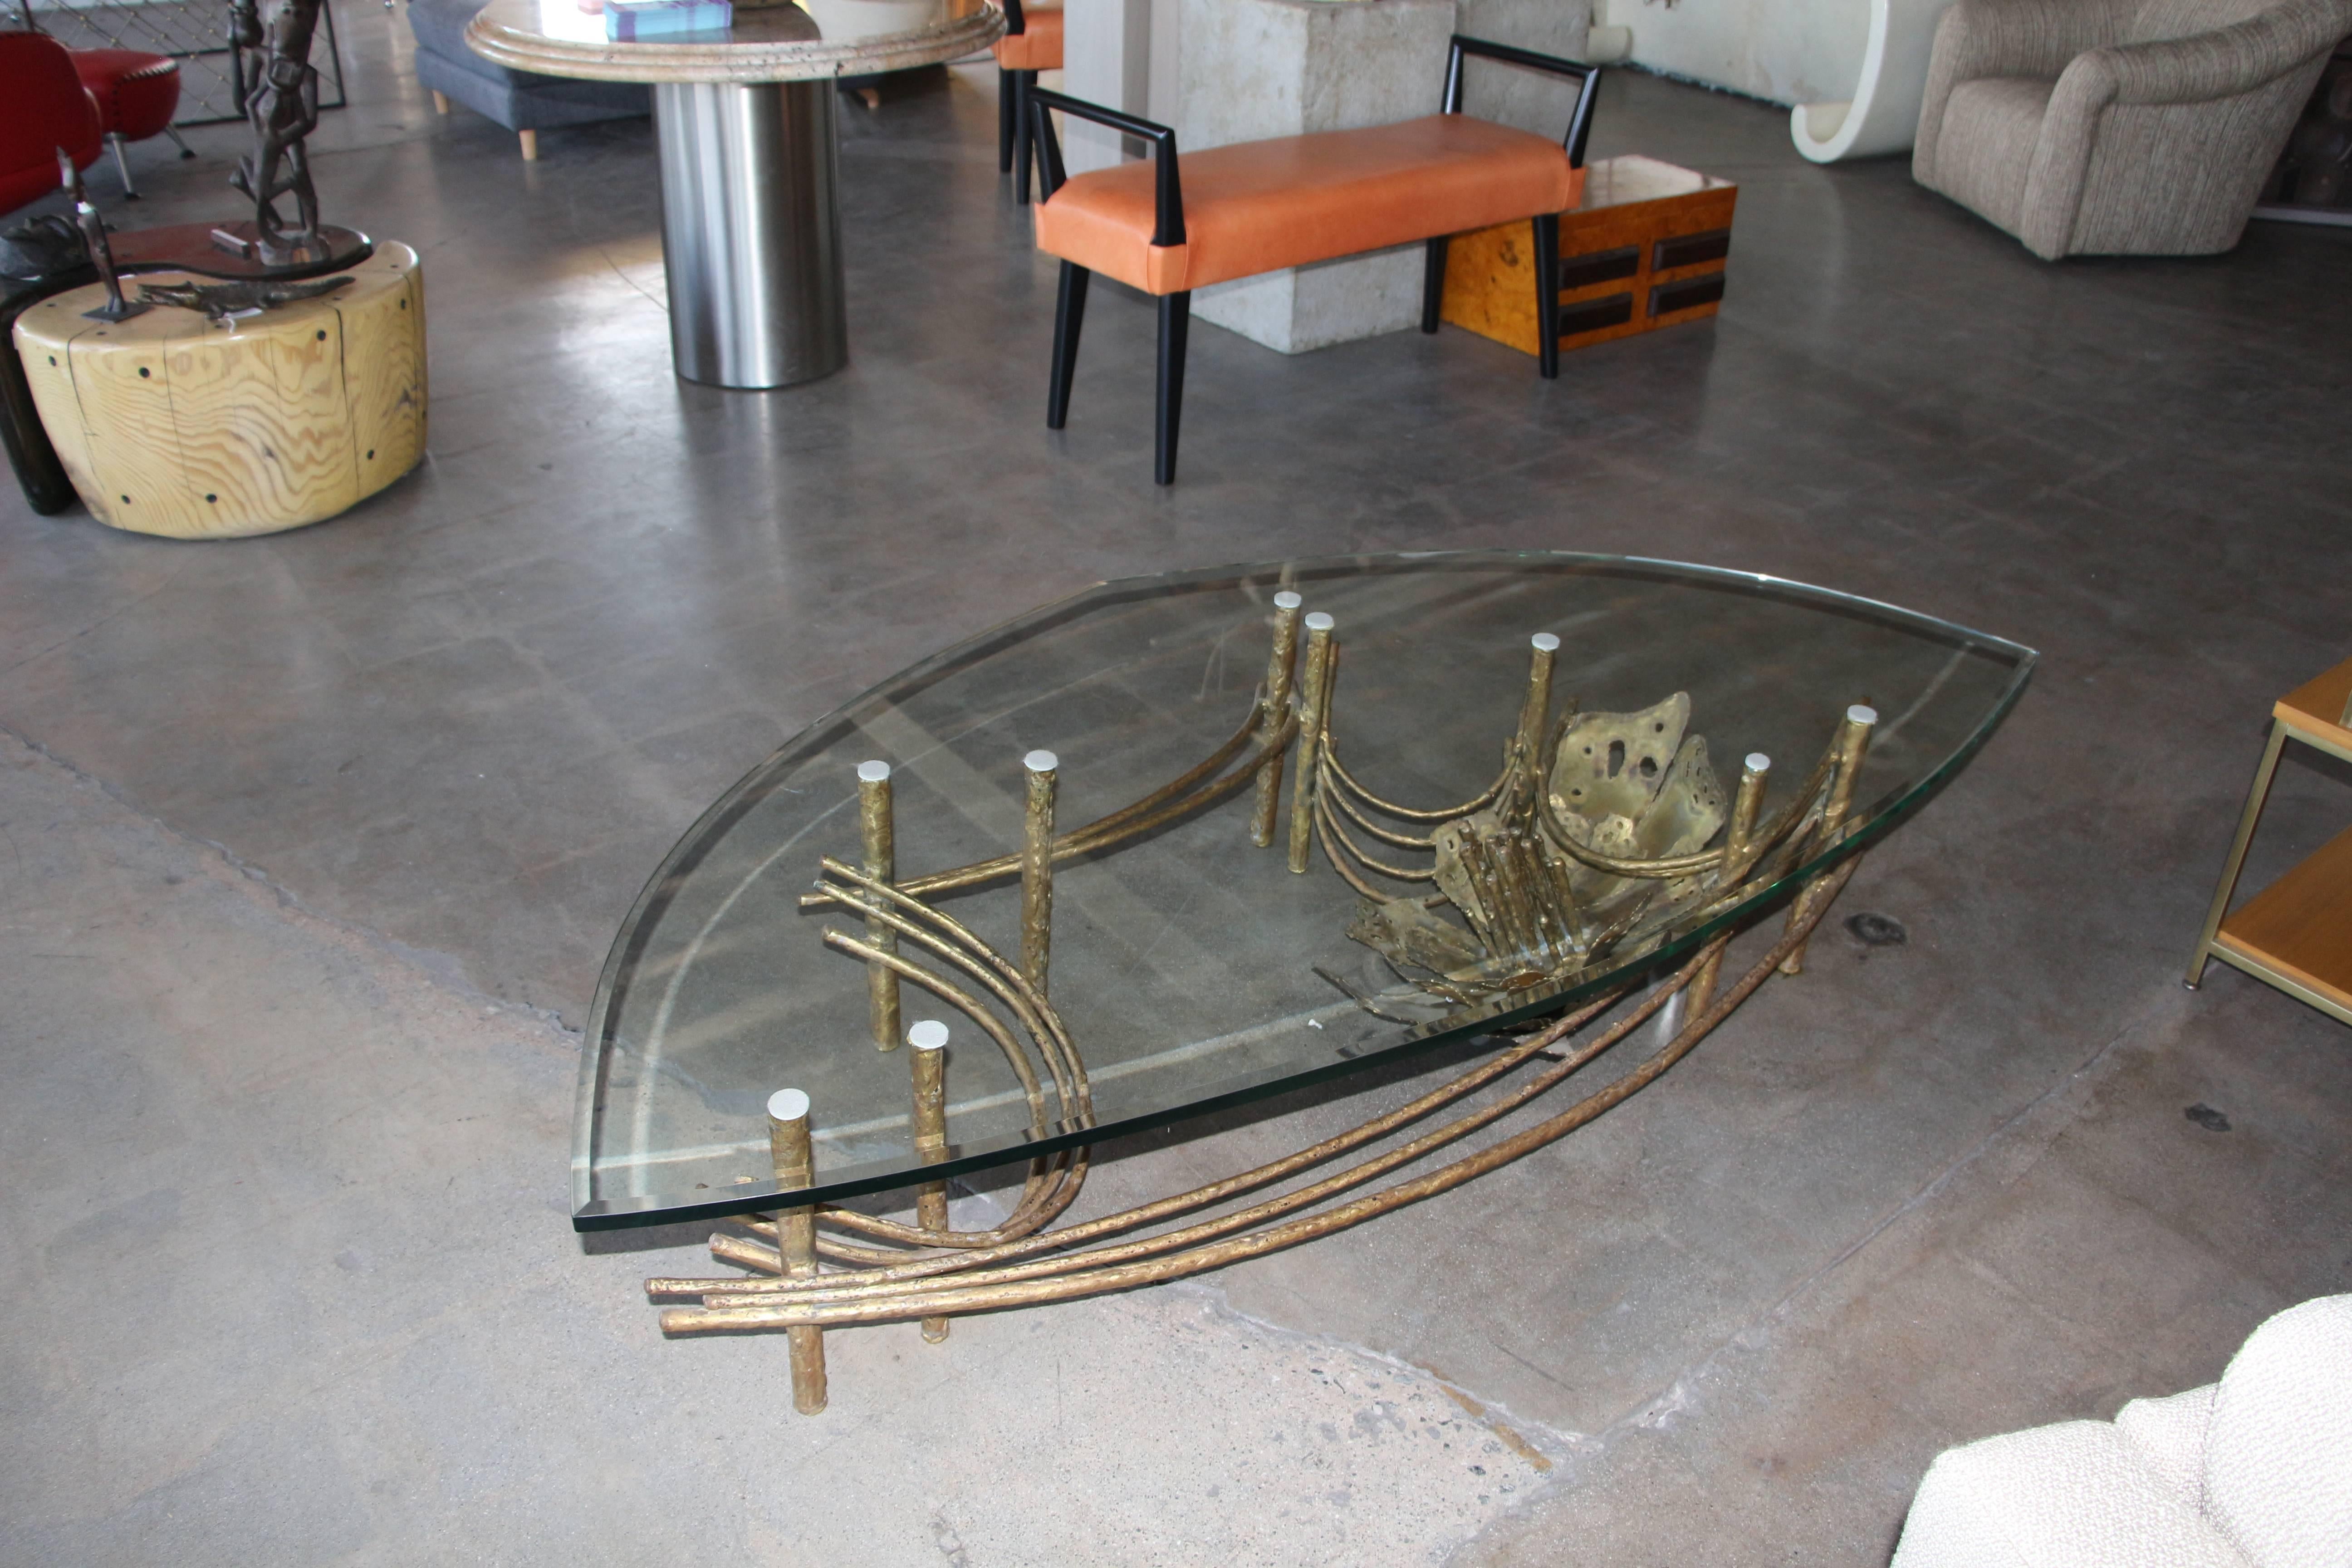 A nice Daniel Gluck coffee table with a most unusual 3/4 inch bevelled edge glass top. The lotus flower design is surrounded by nine supports. It can probably handle a larger top if necessary. The petals of the lotus flower are not all welded to the